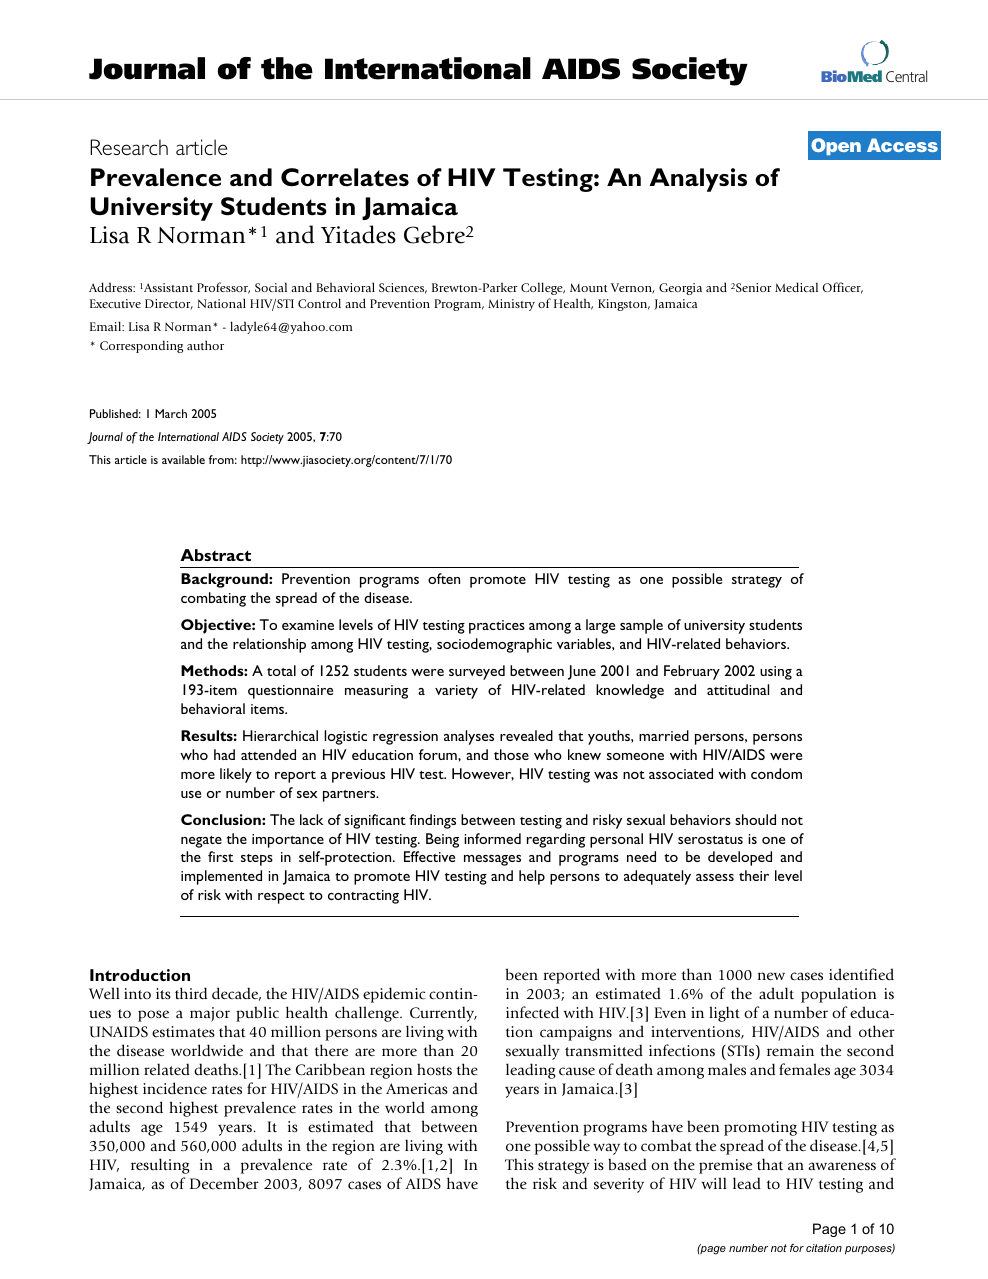 Prevalence and Correlates of HIV Testing An Analysis of University Students in Jamaica photo